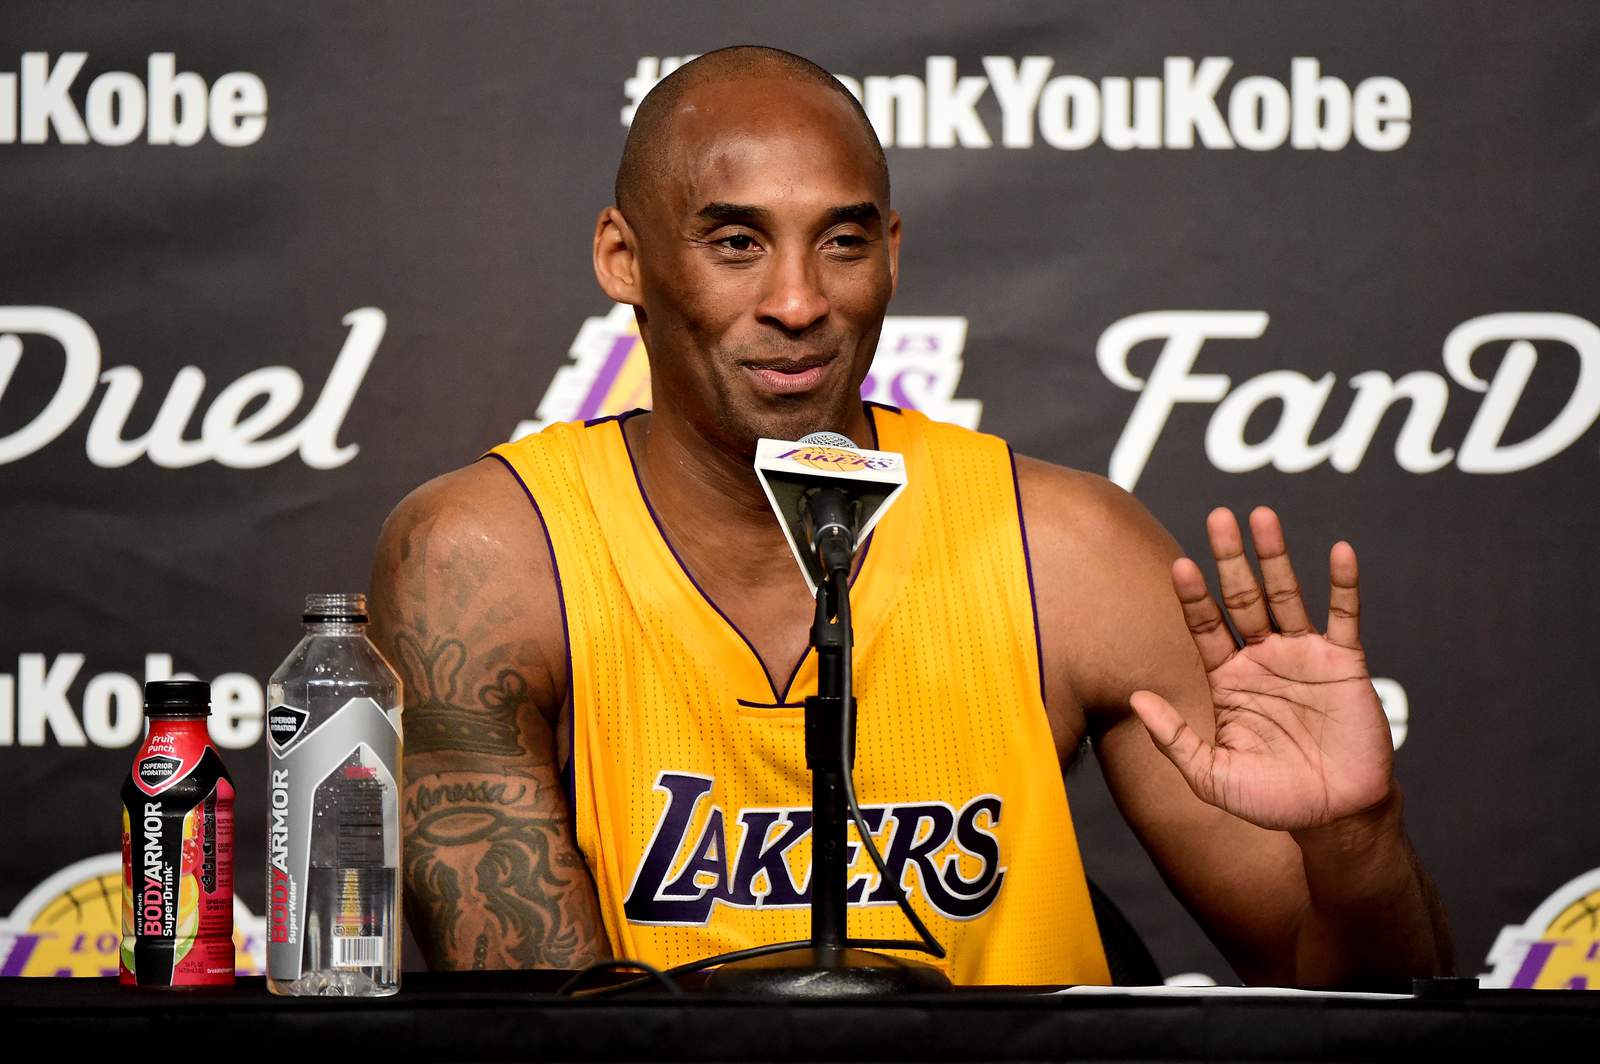 Kobe Bryant addresses the media during the postgame news conference after scoring 60 point in his final NBA game at Staples Center, which happened April 13, 2016.